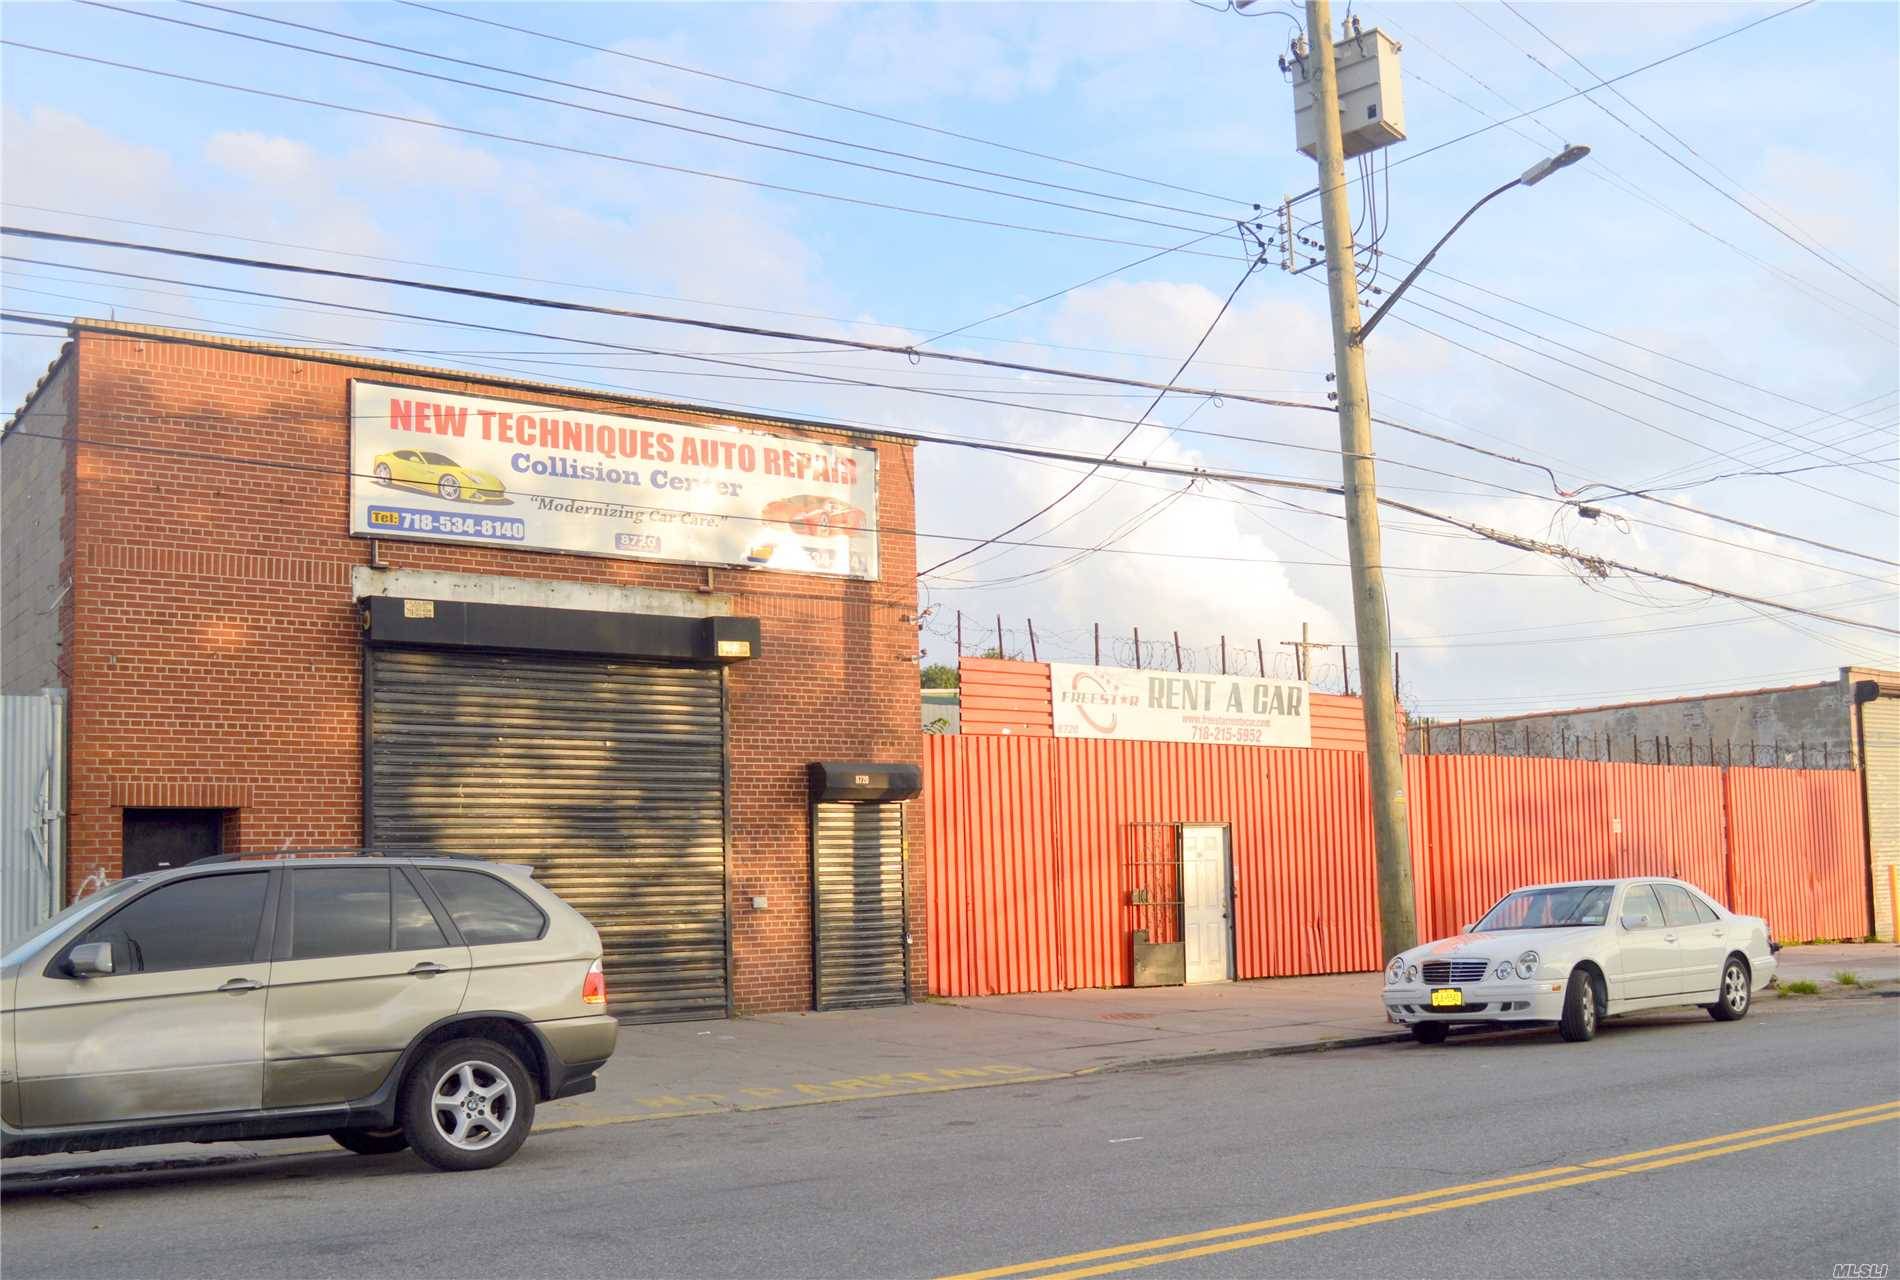 100X100 Commercial Property In Prime Canarsie, Brookyln Location 3 Properties Sold As A Package All Together The Address Is 8720.